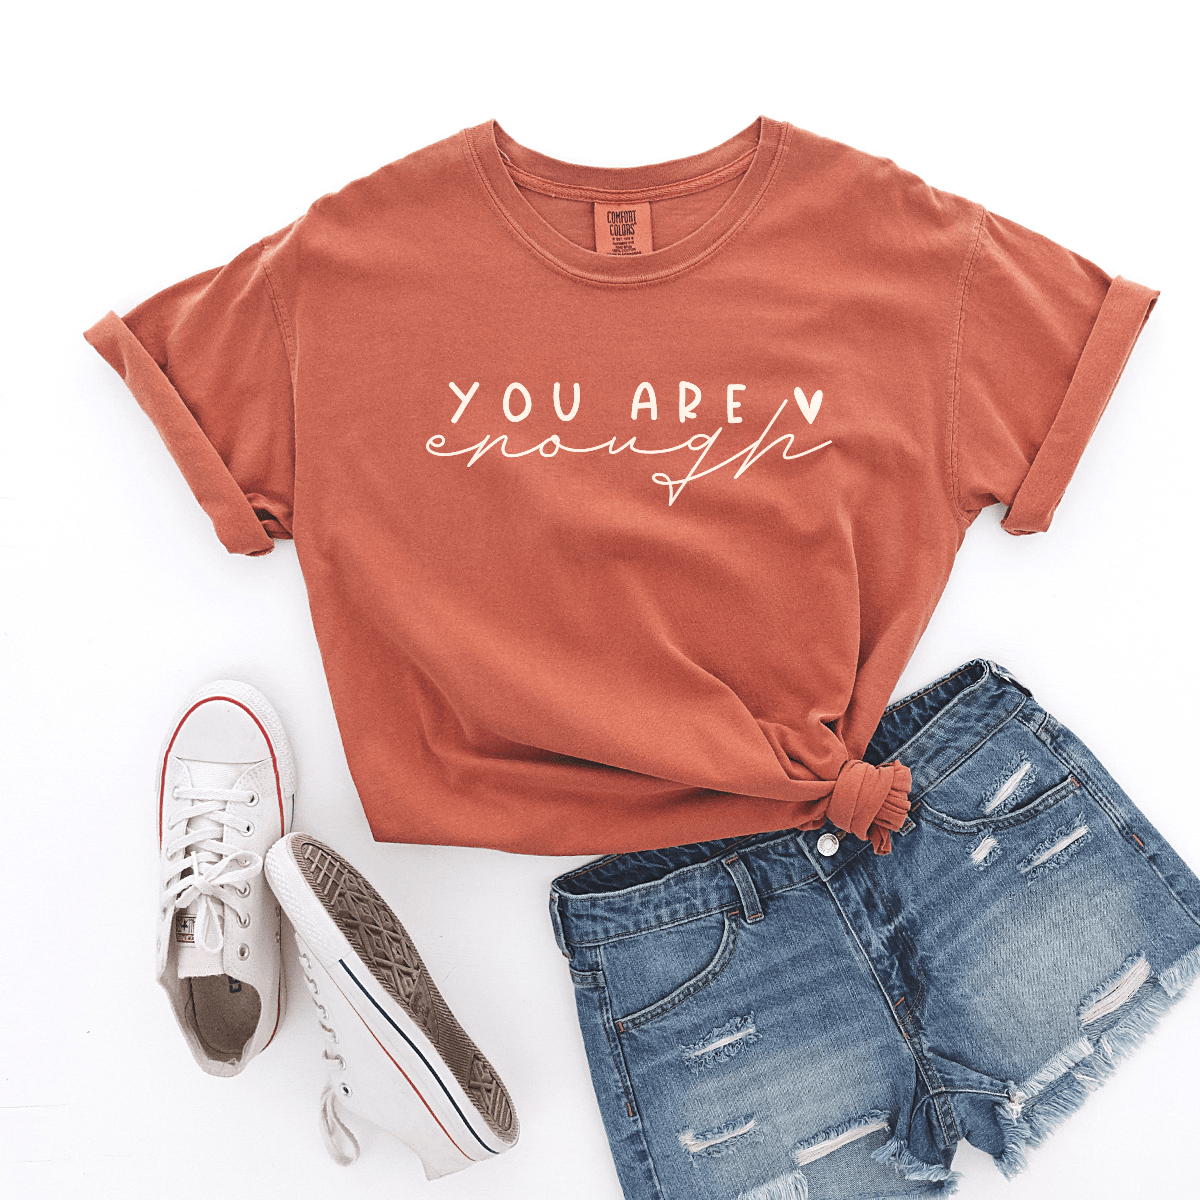 You Are Enough - Premium Wash Tee